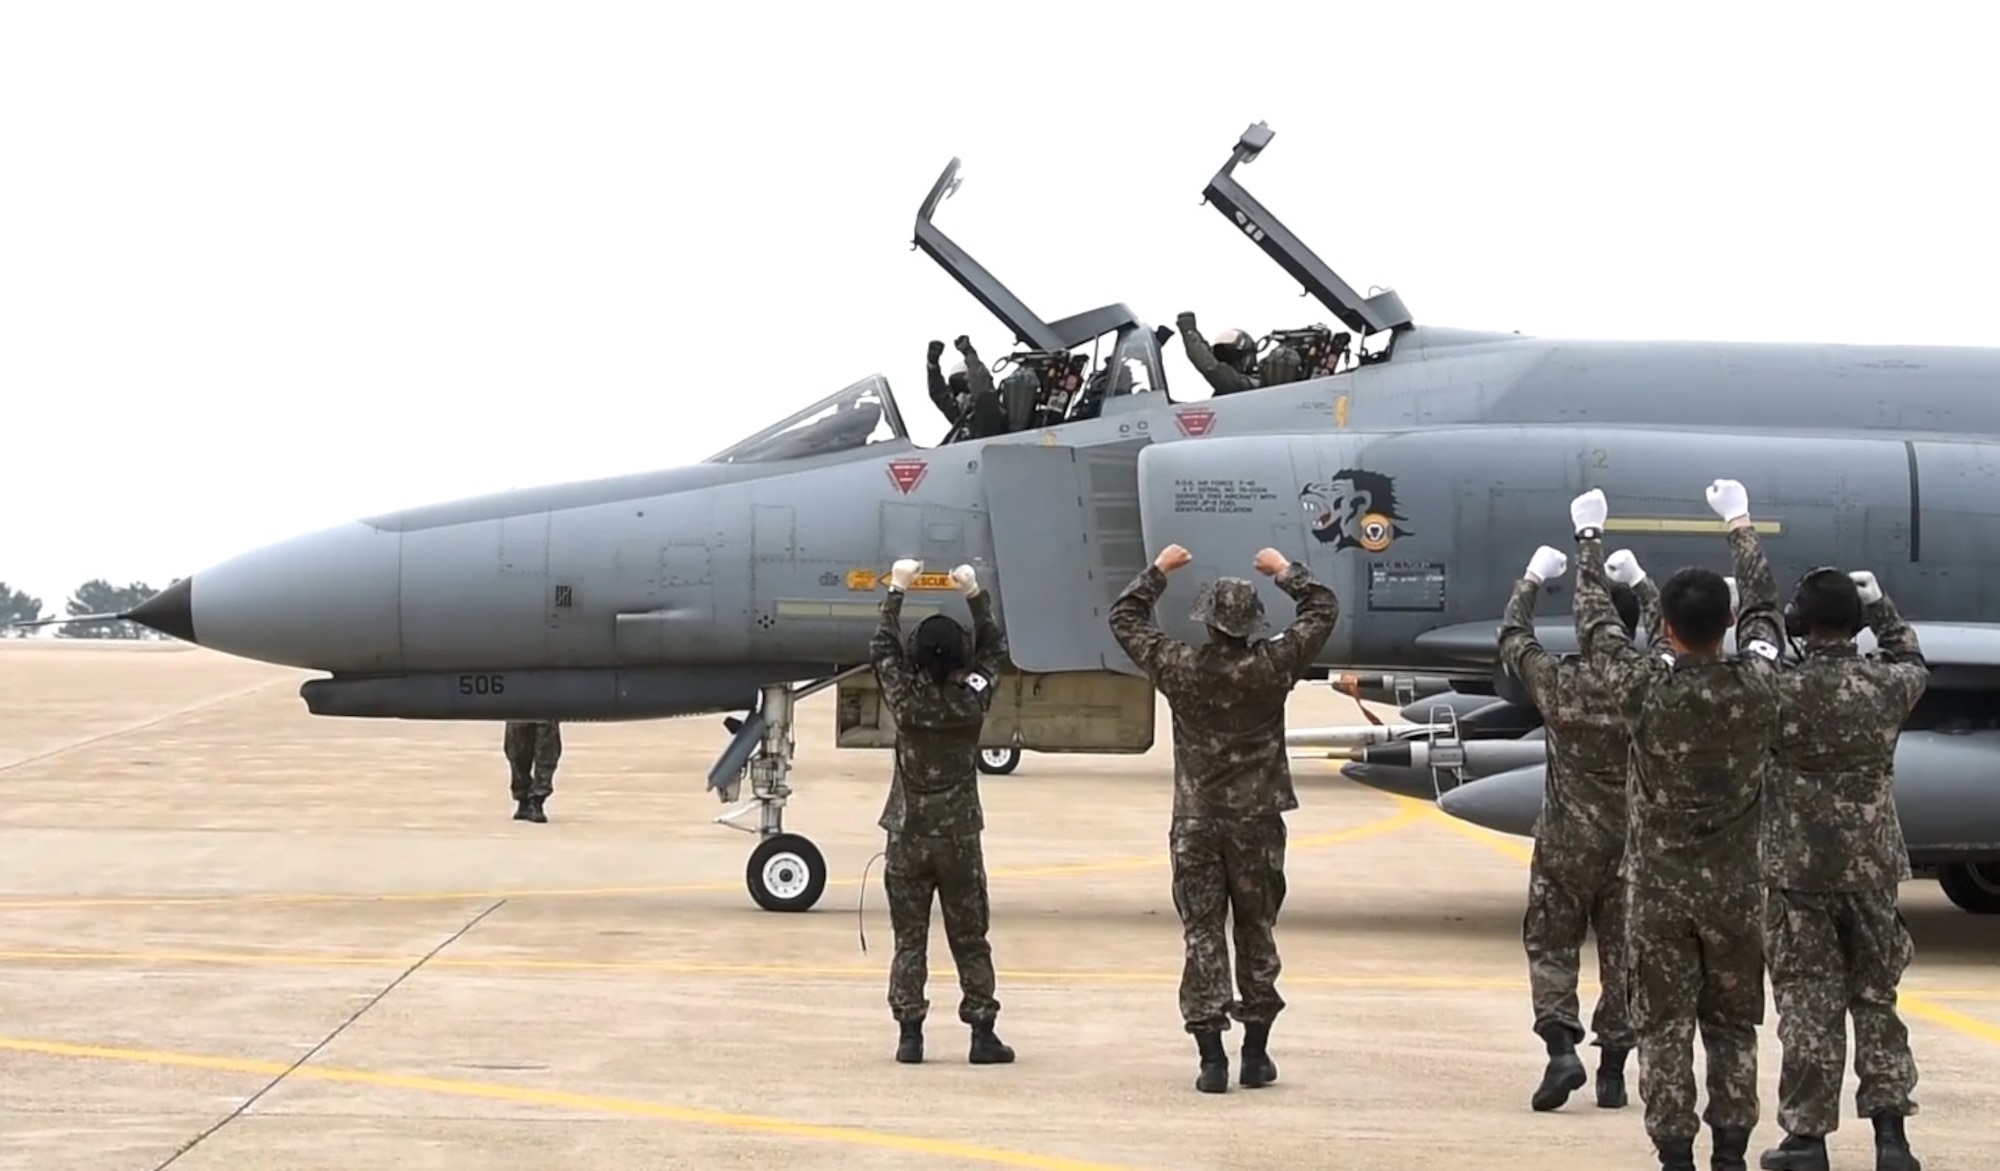 An F-4 Phantom 2 starts to taxi, both ground crew and pilots give a victory sign.